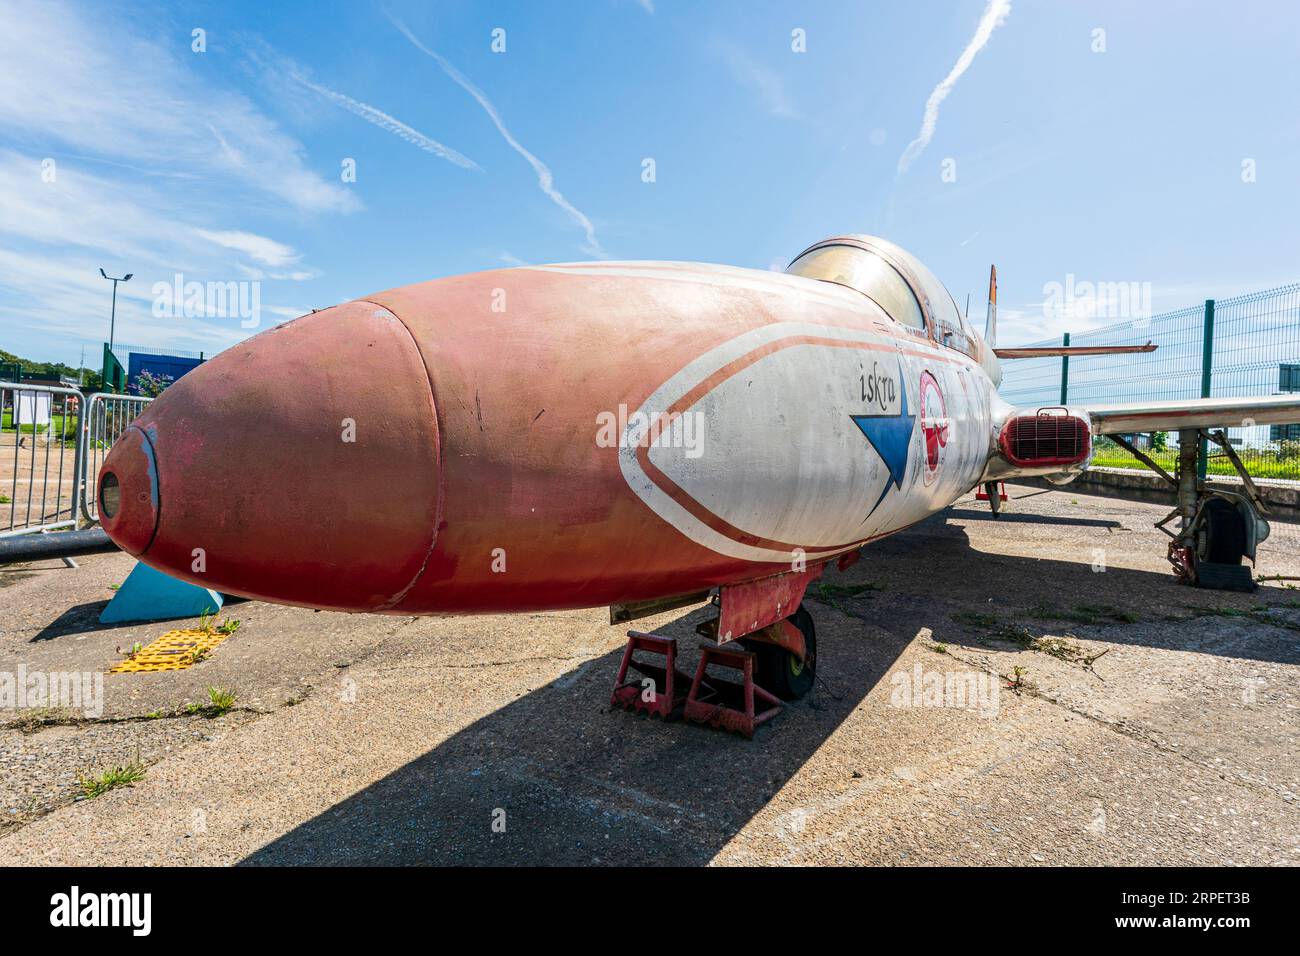 Nosecone view of a Decommissioned PZL Mielec TS-11 Iskra Polish trainer jet parked outdoors at the RAF Manston History Museum. Sunny, blue sky. Stock Photo